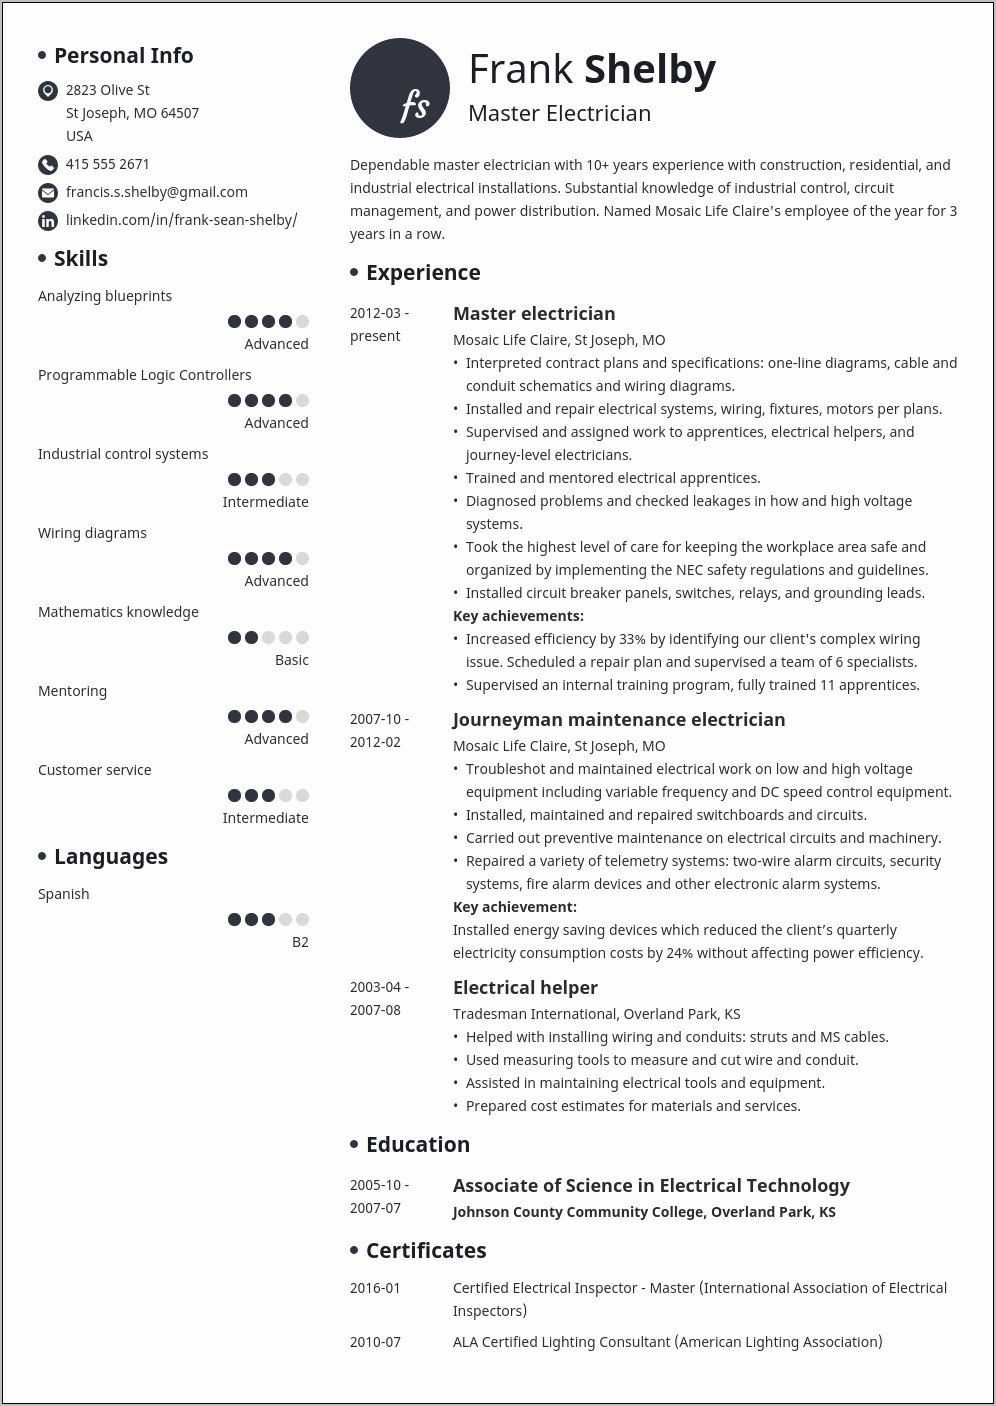 Resume Objective Words To Use